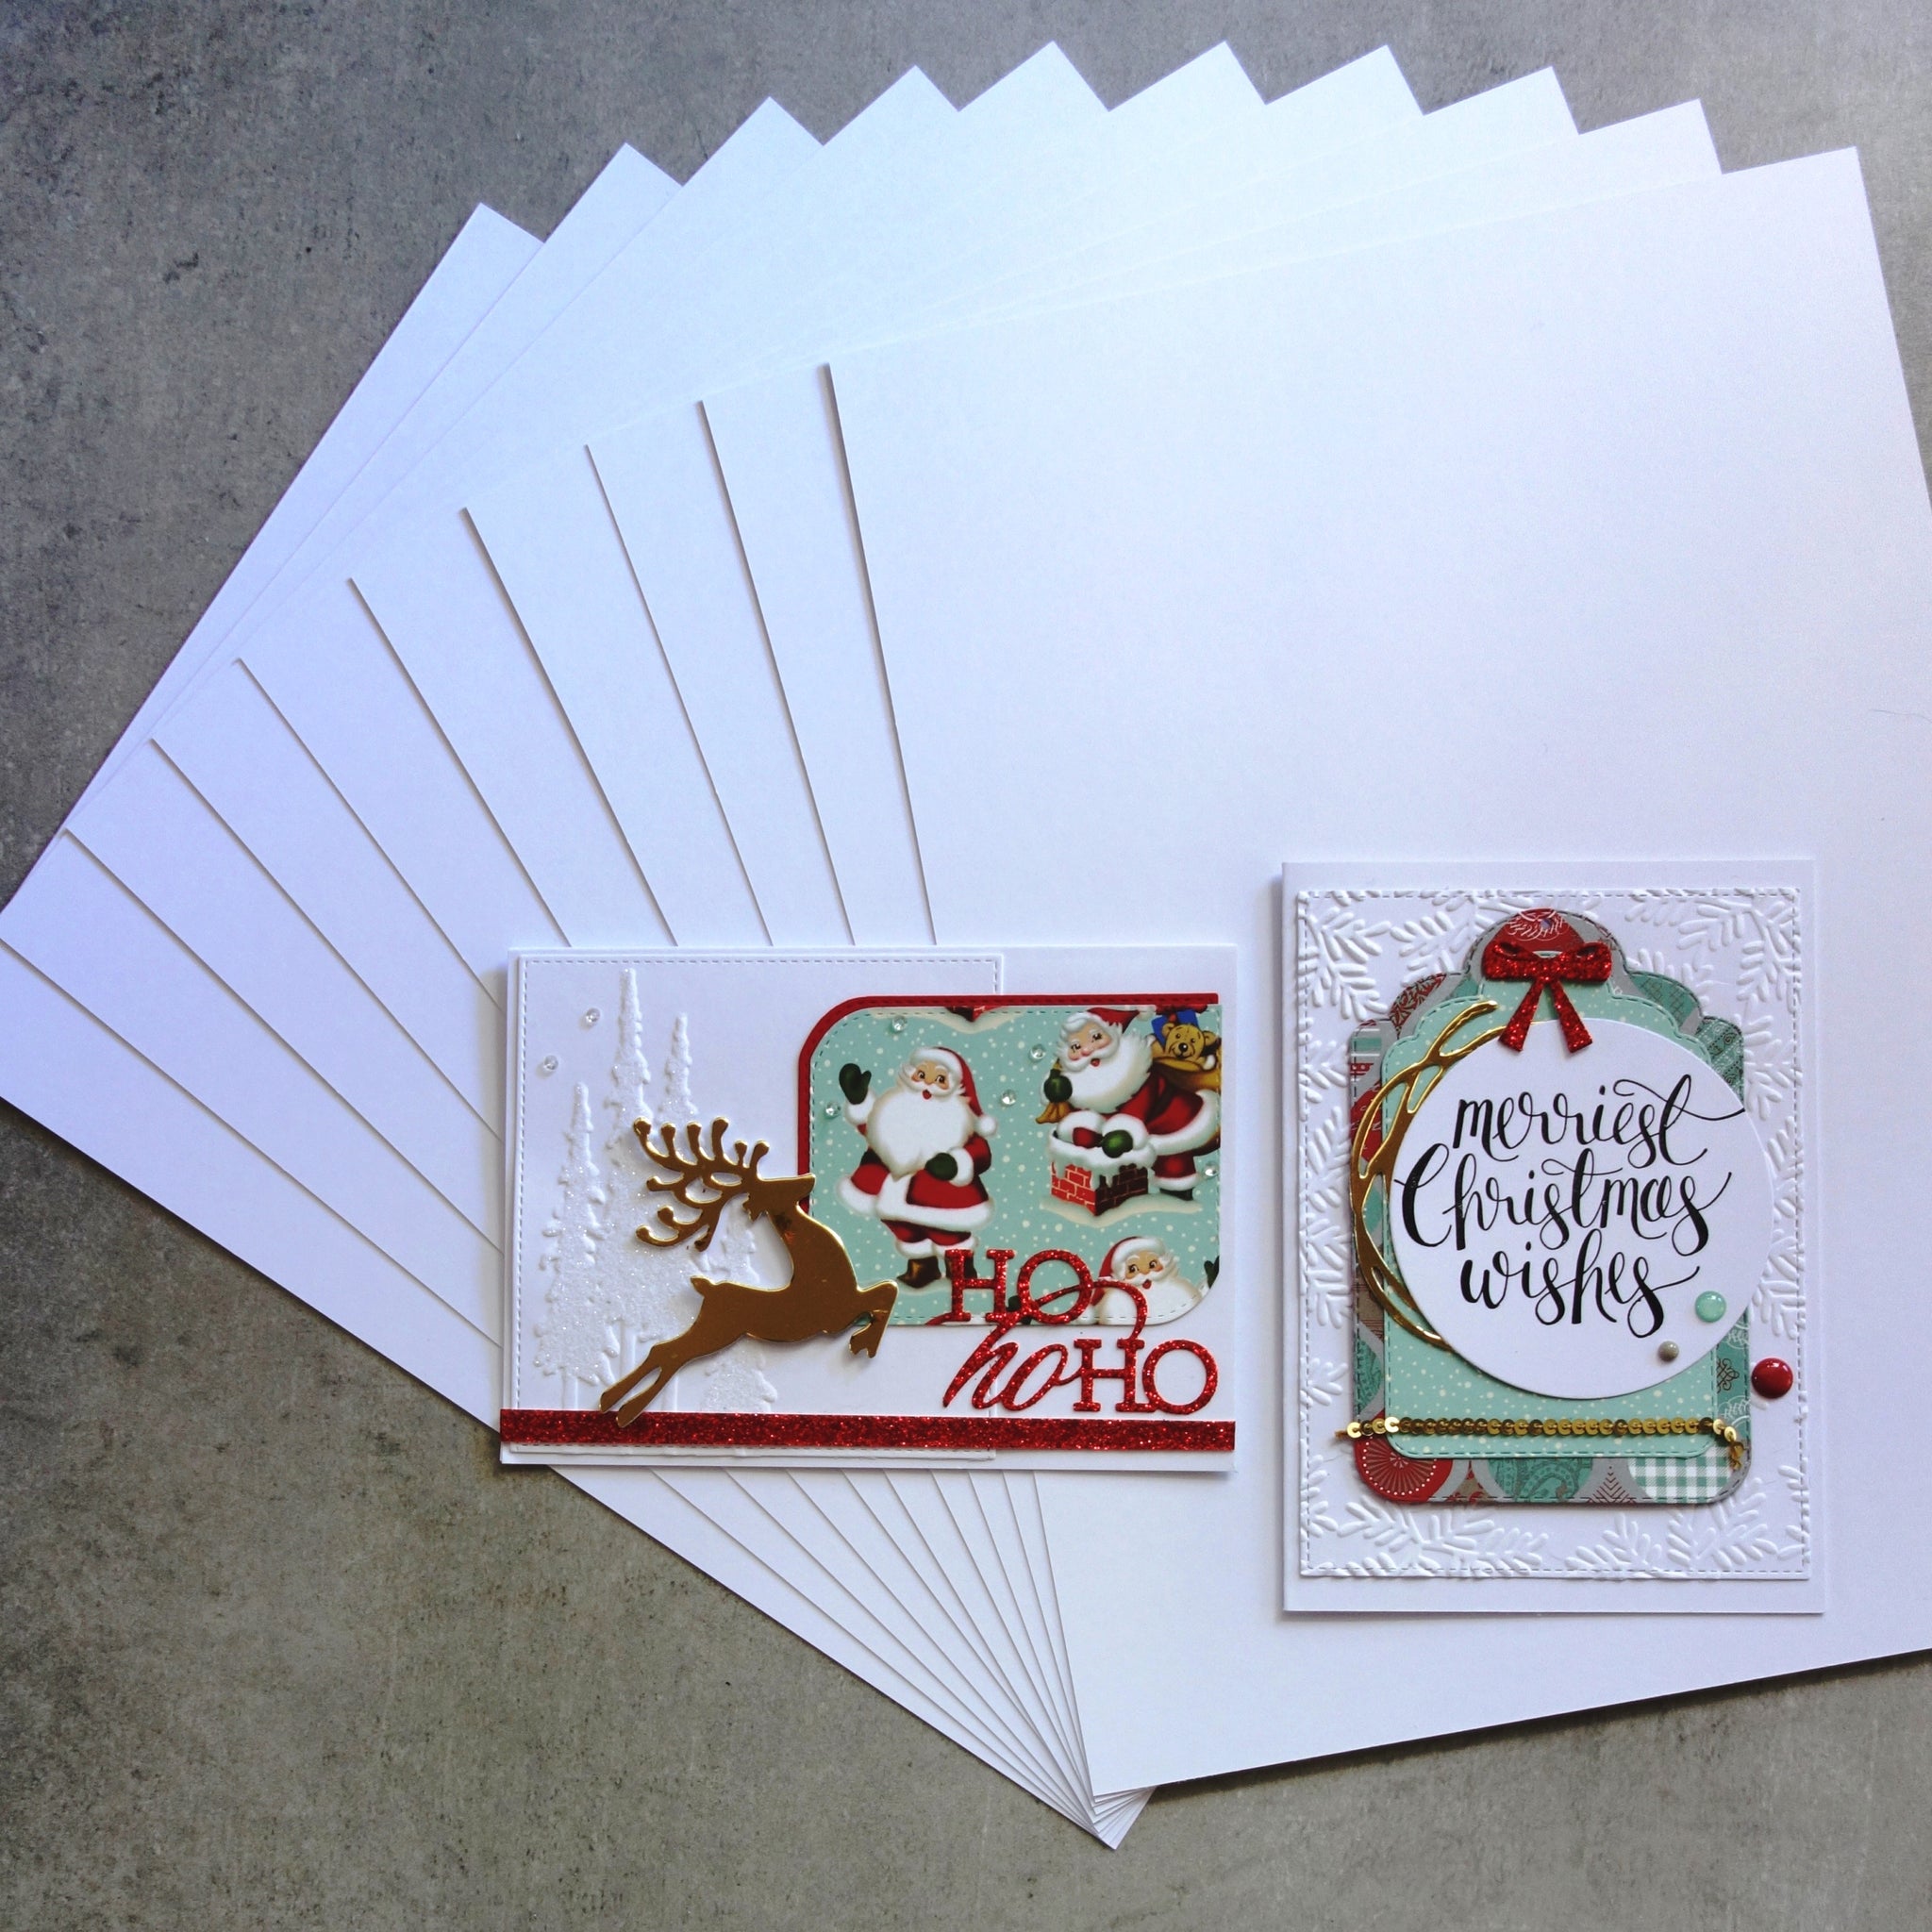 CARD A4 SMOOTH BRIGHT WHITE 280 GSM 10 SHEETS CARDMAKING